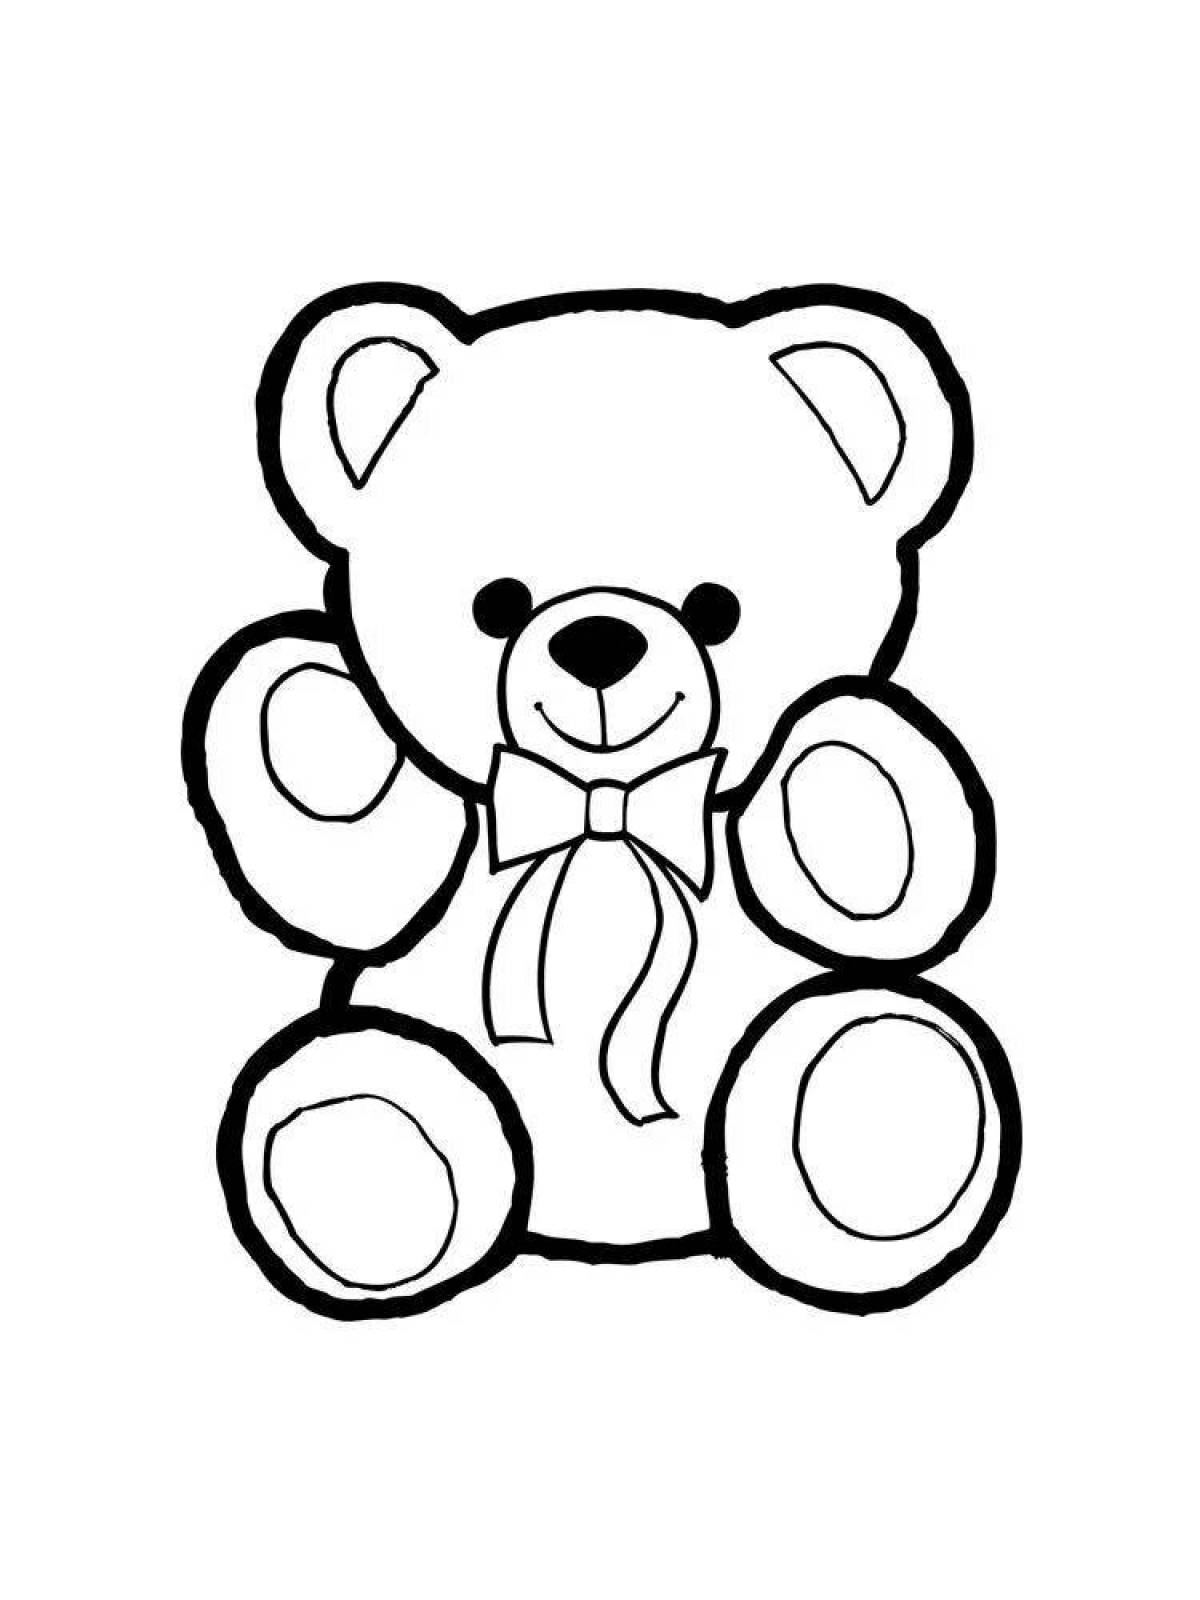 Adorable gummy bears coloring page